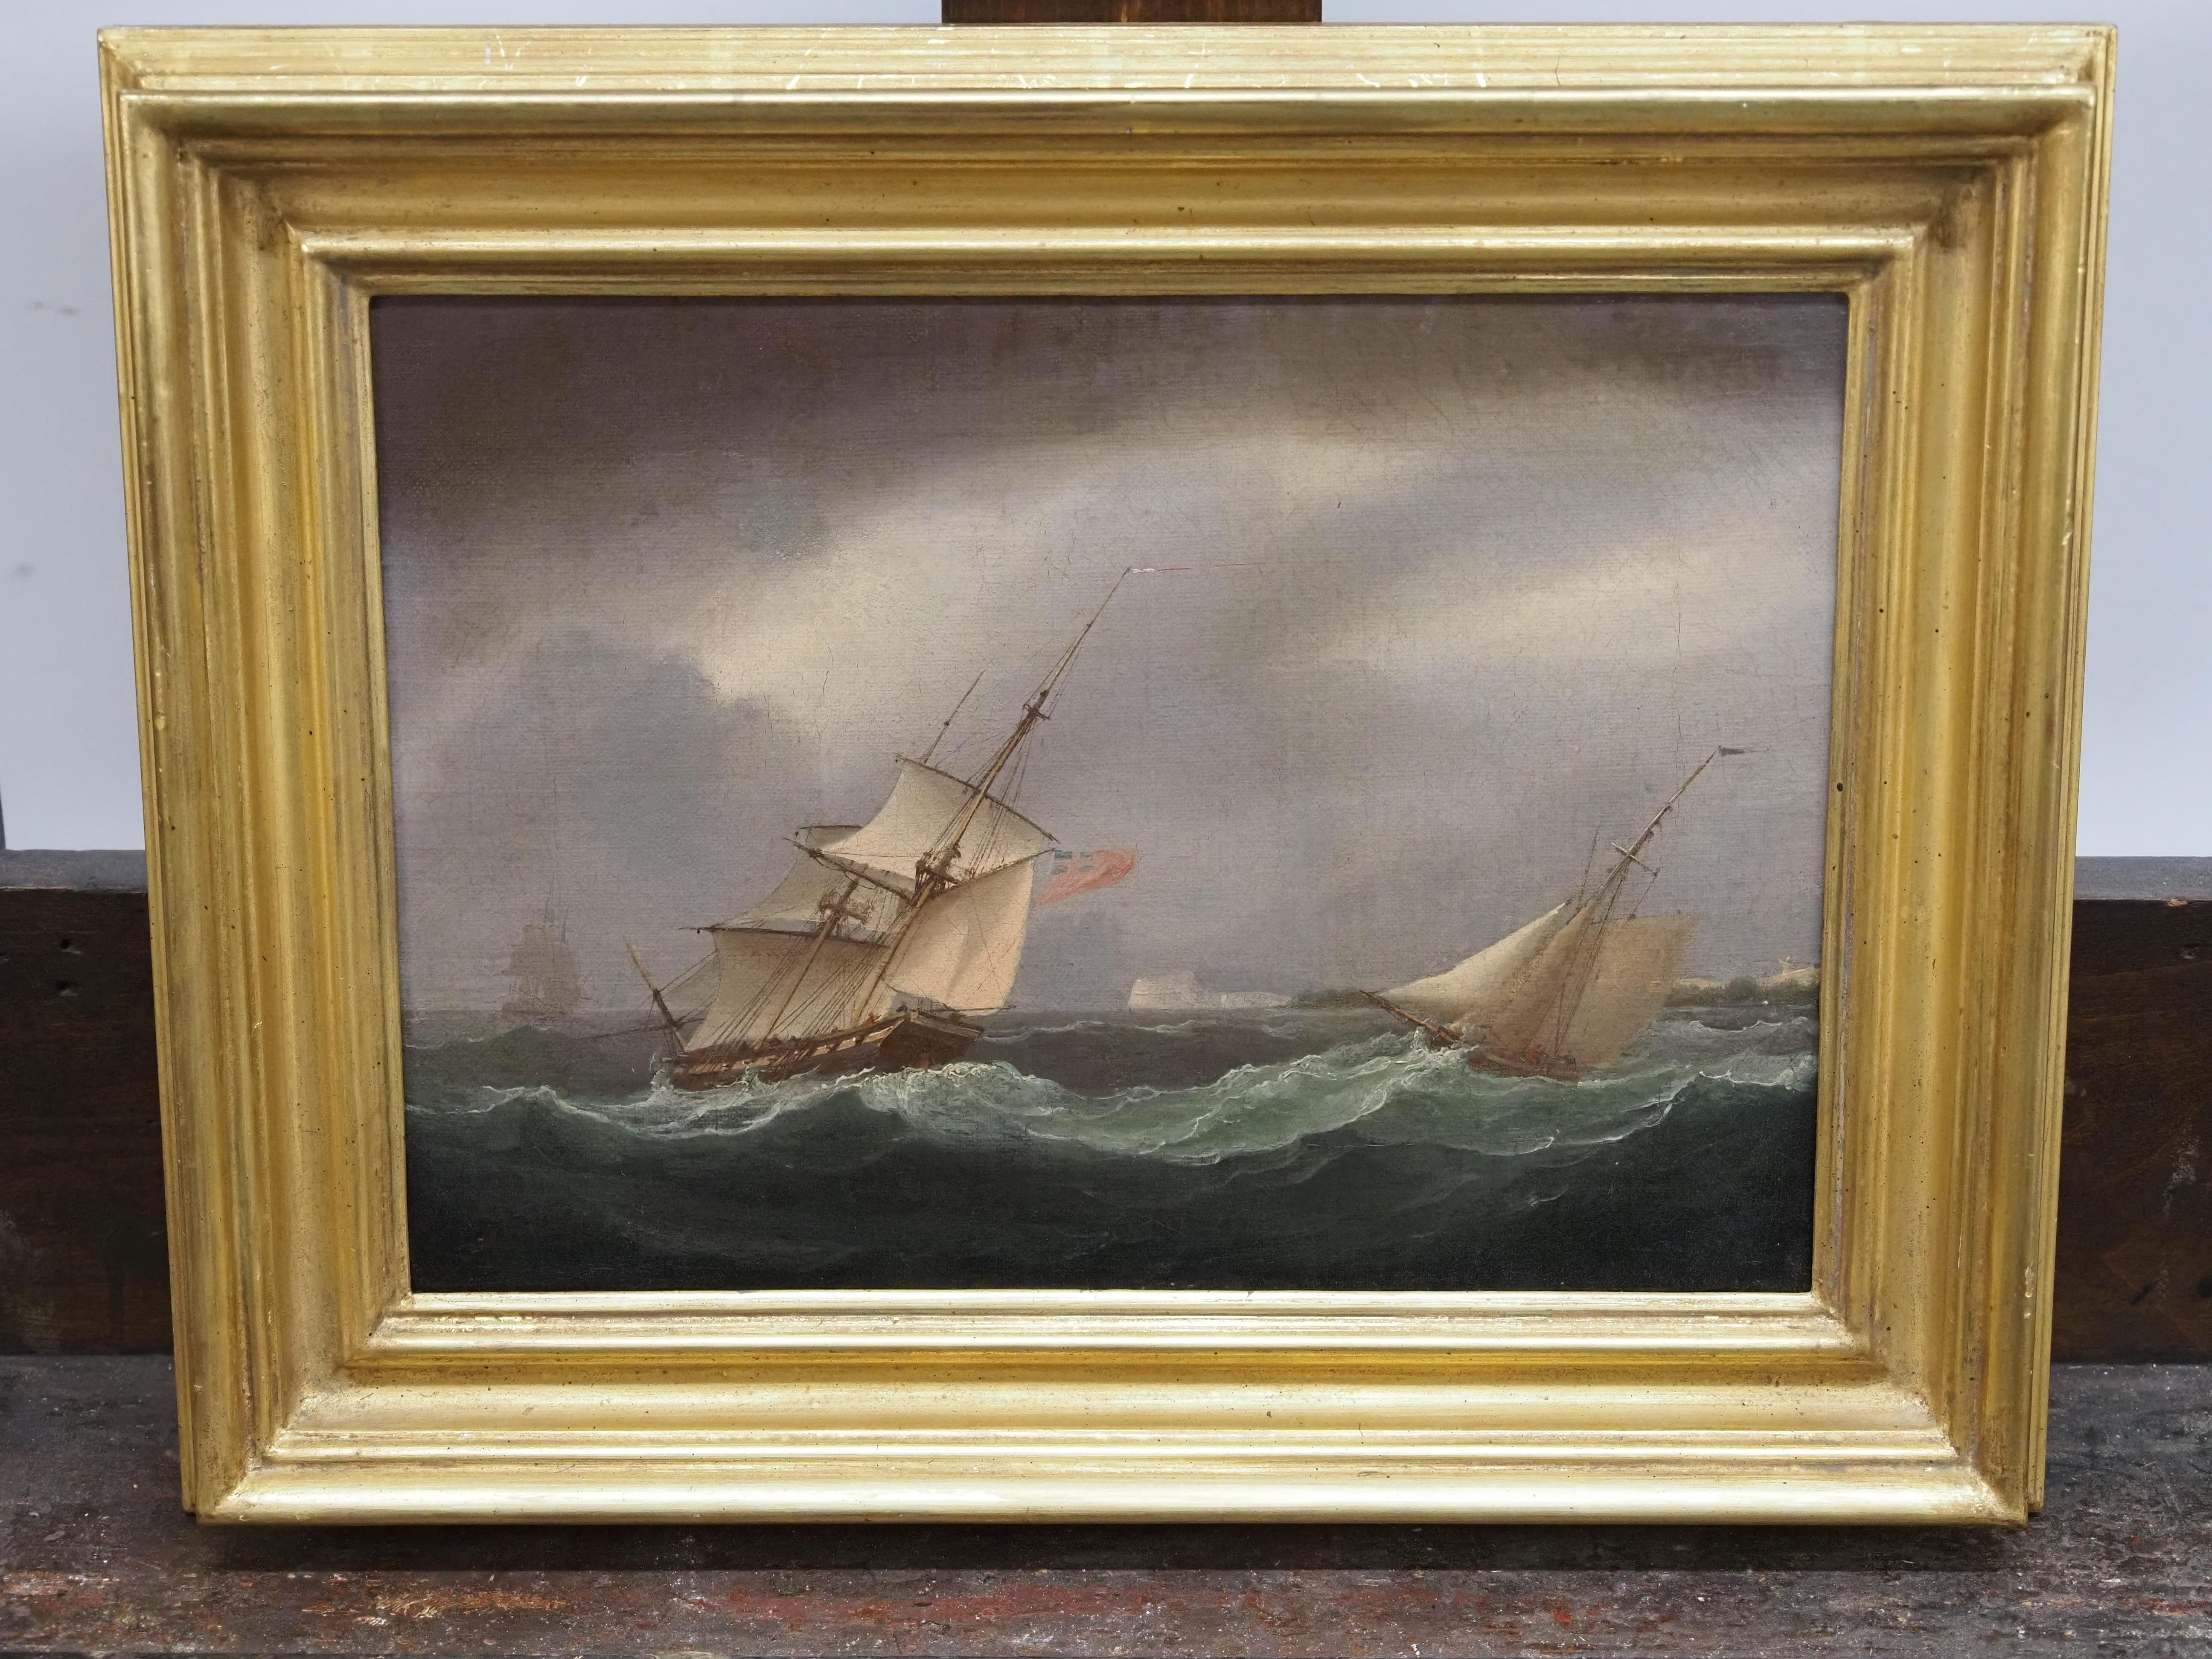 Shipping in choppy waters of a coastline - Old Masters Painting by Thomas Buttersworth